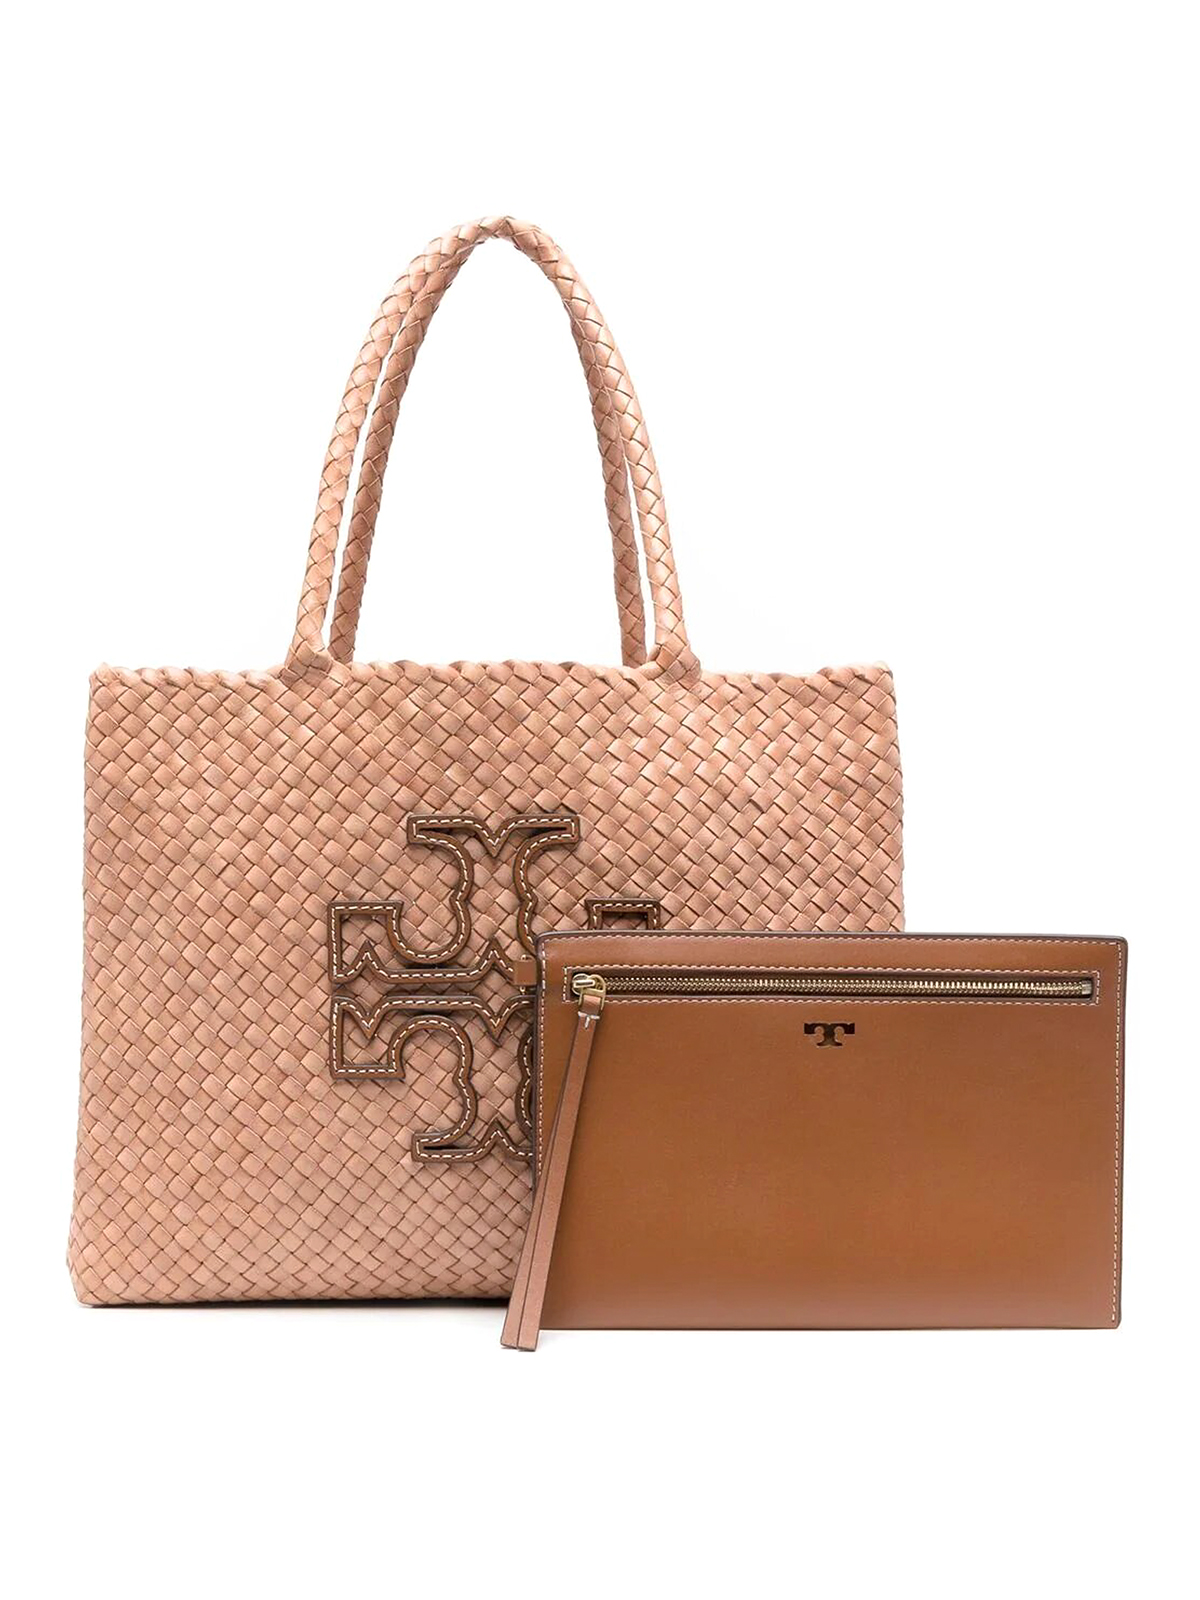 Totes bags Tory Burch - Mcgraw dragon woven tote with pouch and logo -  146019267